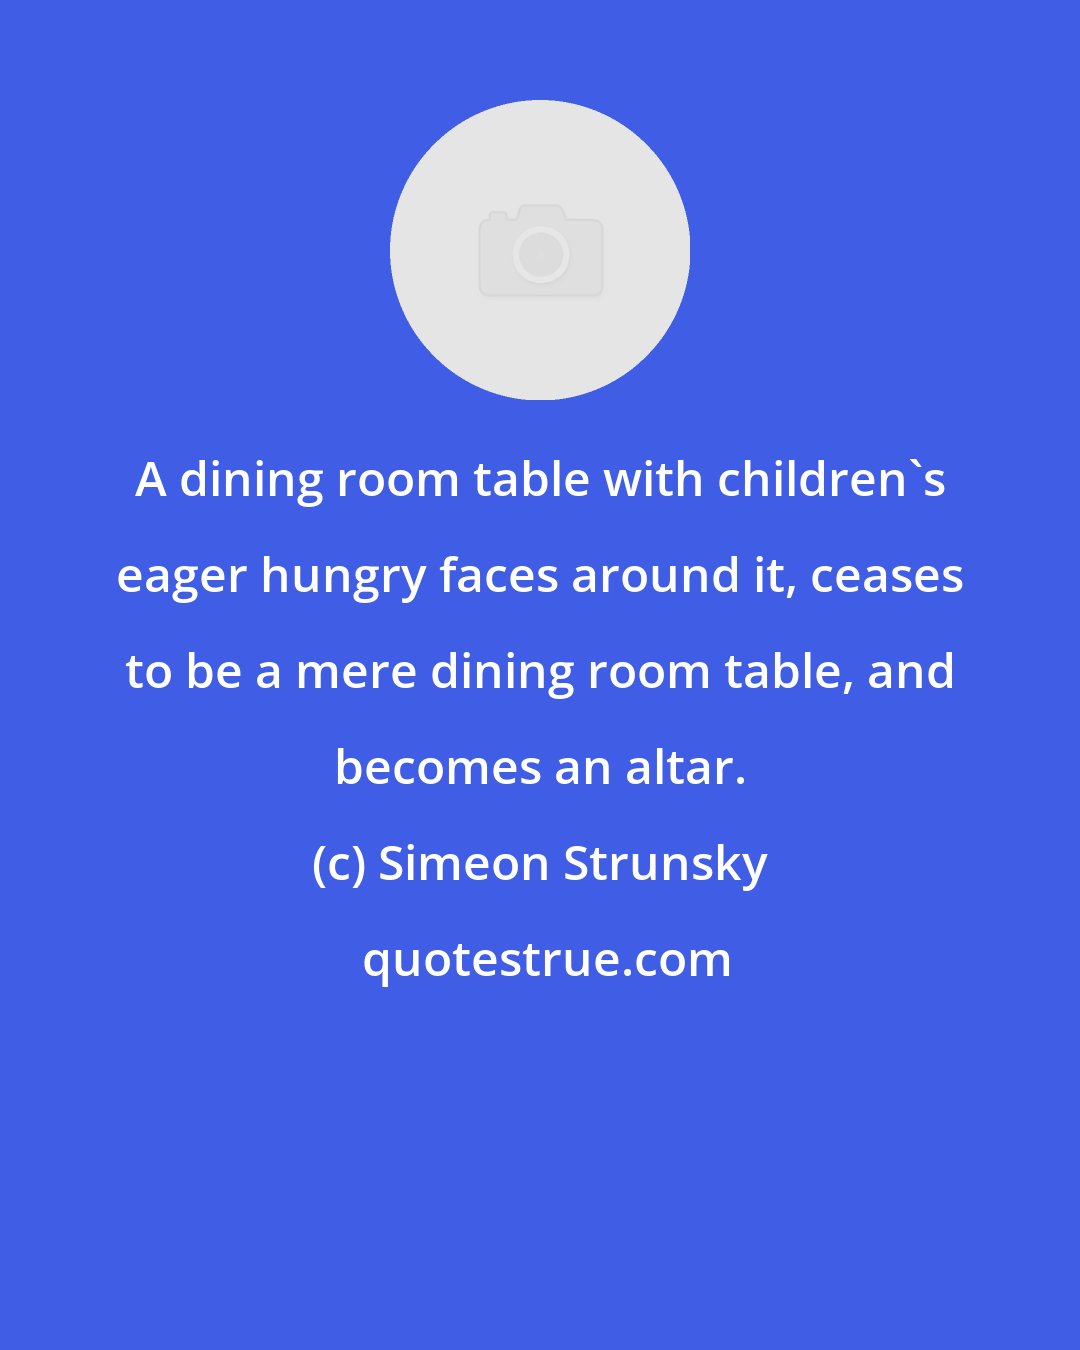 Simeon Strunsky: A dining room table with children's eager hungry faces around it, ceases to be a mere dining room table, and becomes an altar.